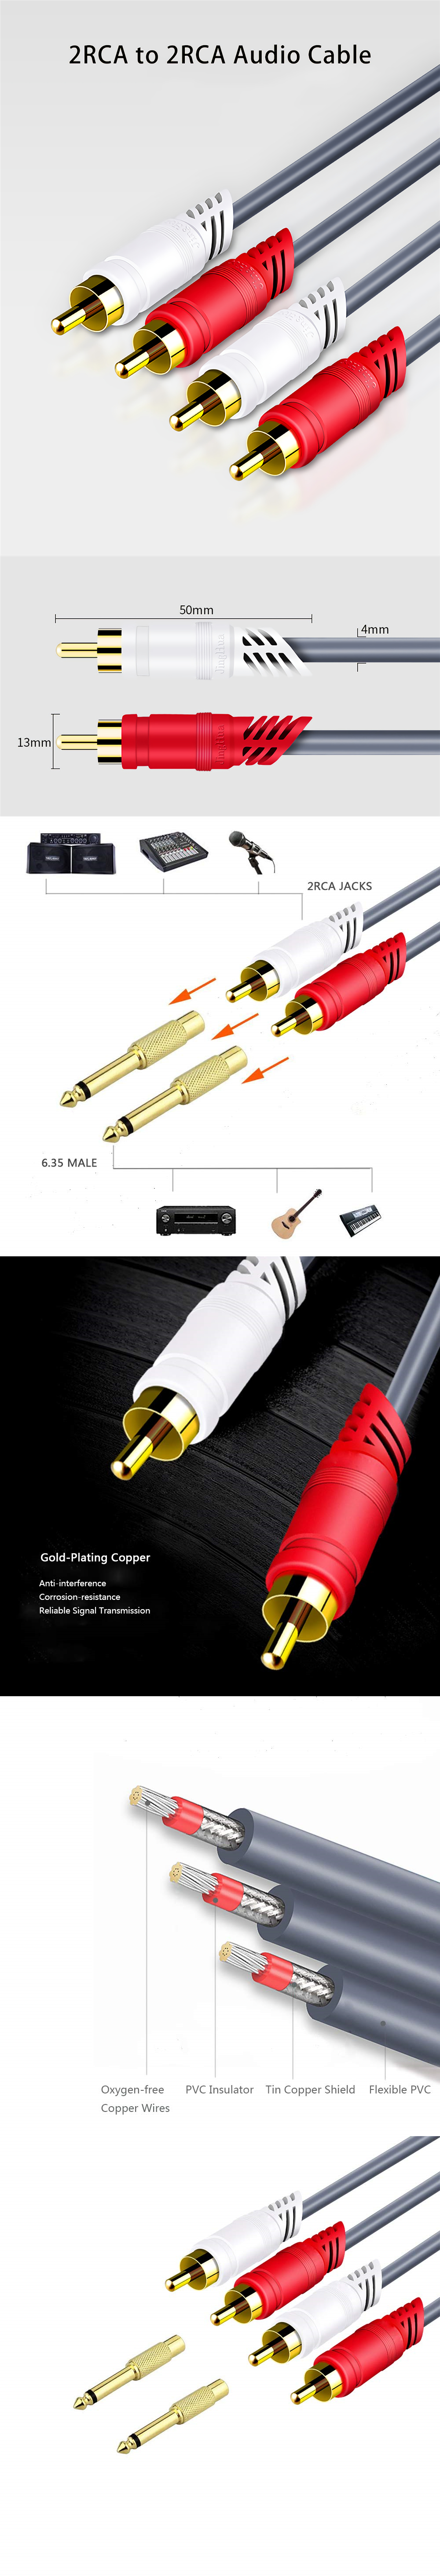 JINGHUA 2RCA to 2RCA Audio Cable Male to Male Gold-Plated RCA Audio Cable for Home Theater DVD TV Amplifier CD Soundbox